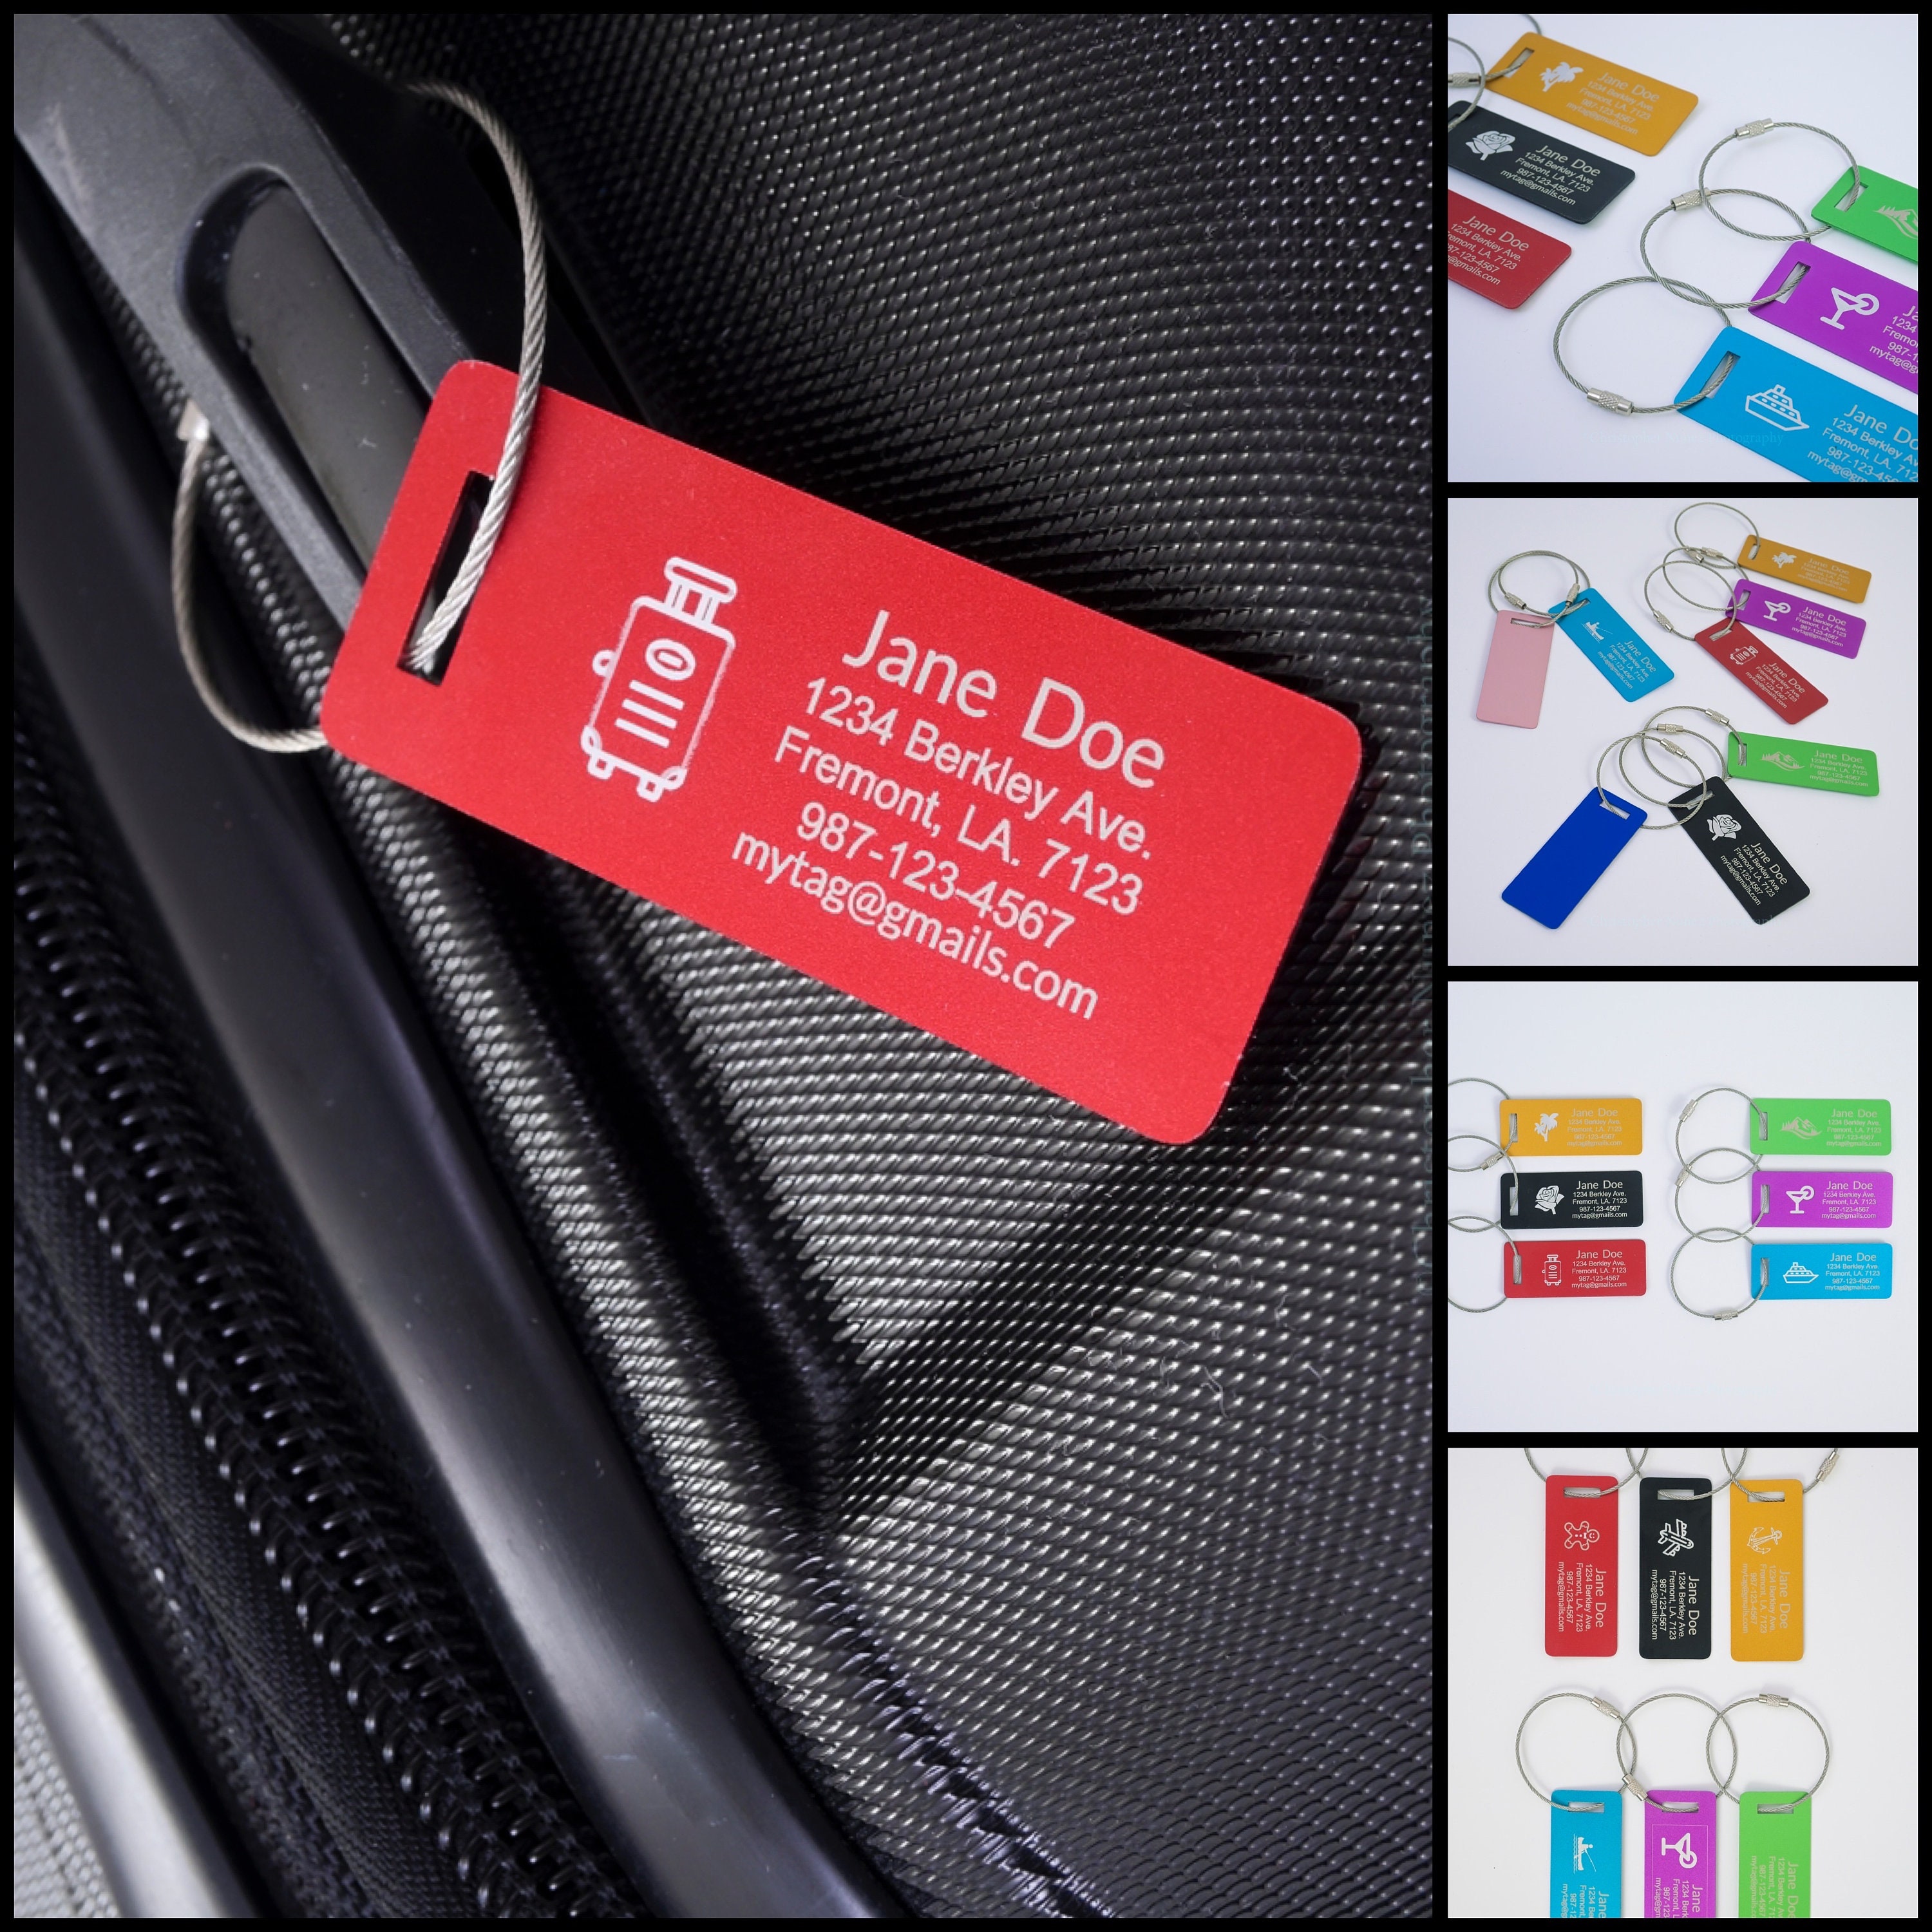  Bright Colorful Luggage Tags, Soft Assorted Suitcase Luggage  Bag Tags by Aphlos (7 Colors)